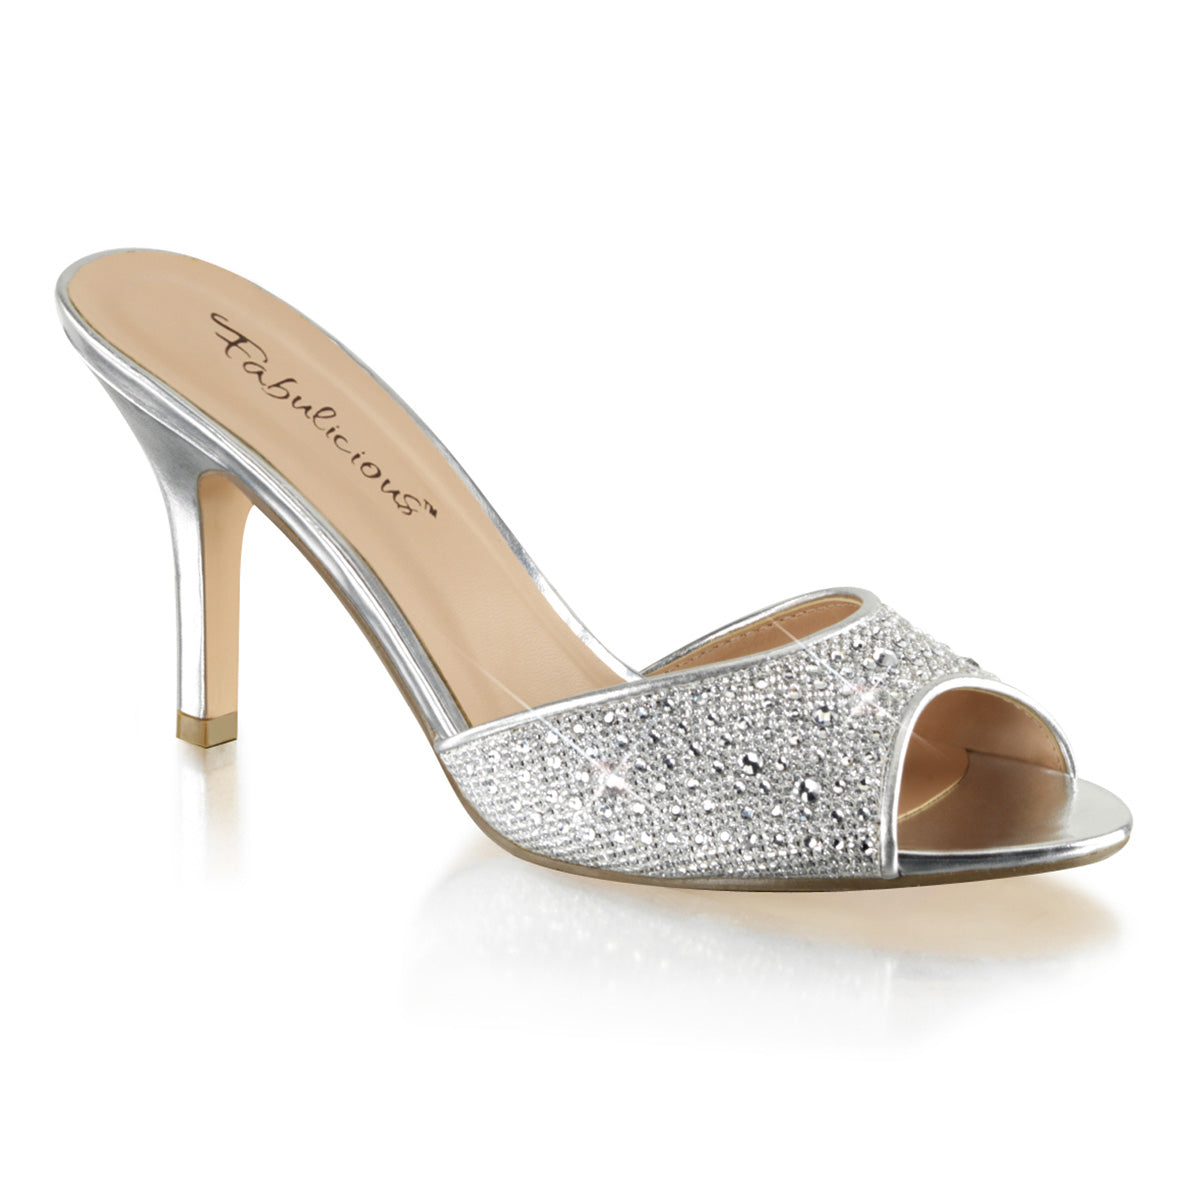 LUCY-01 Fabulicious 3 Inch Heel Silver Glitter Sexy Slip On Shoes